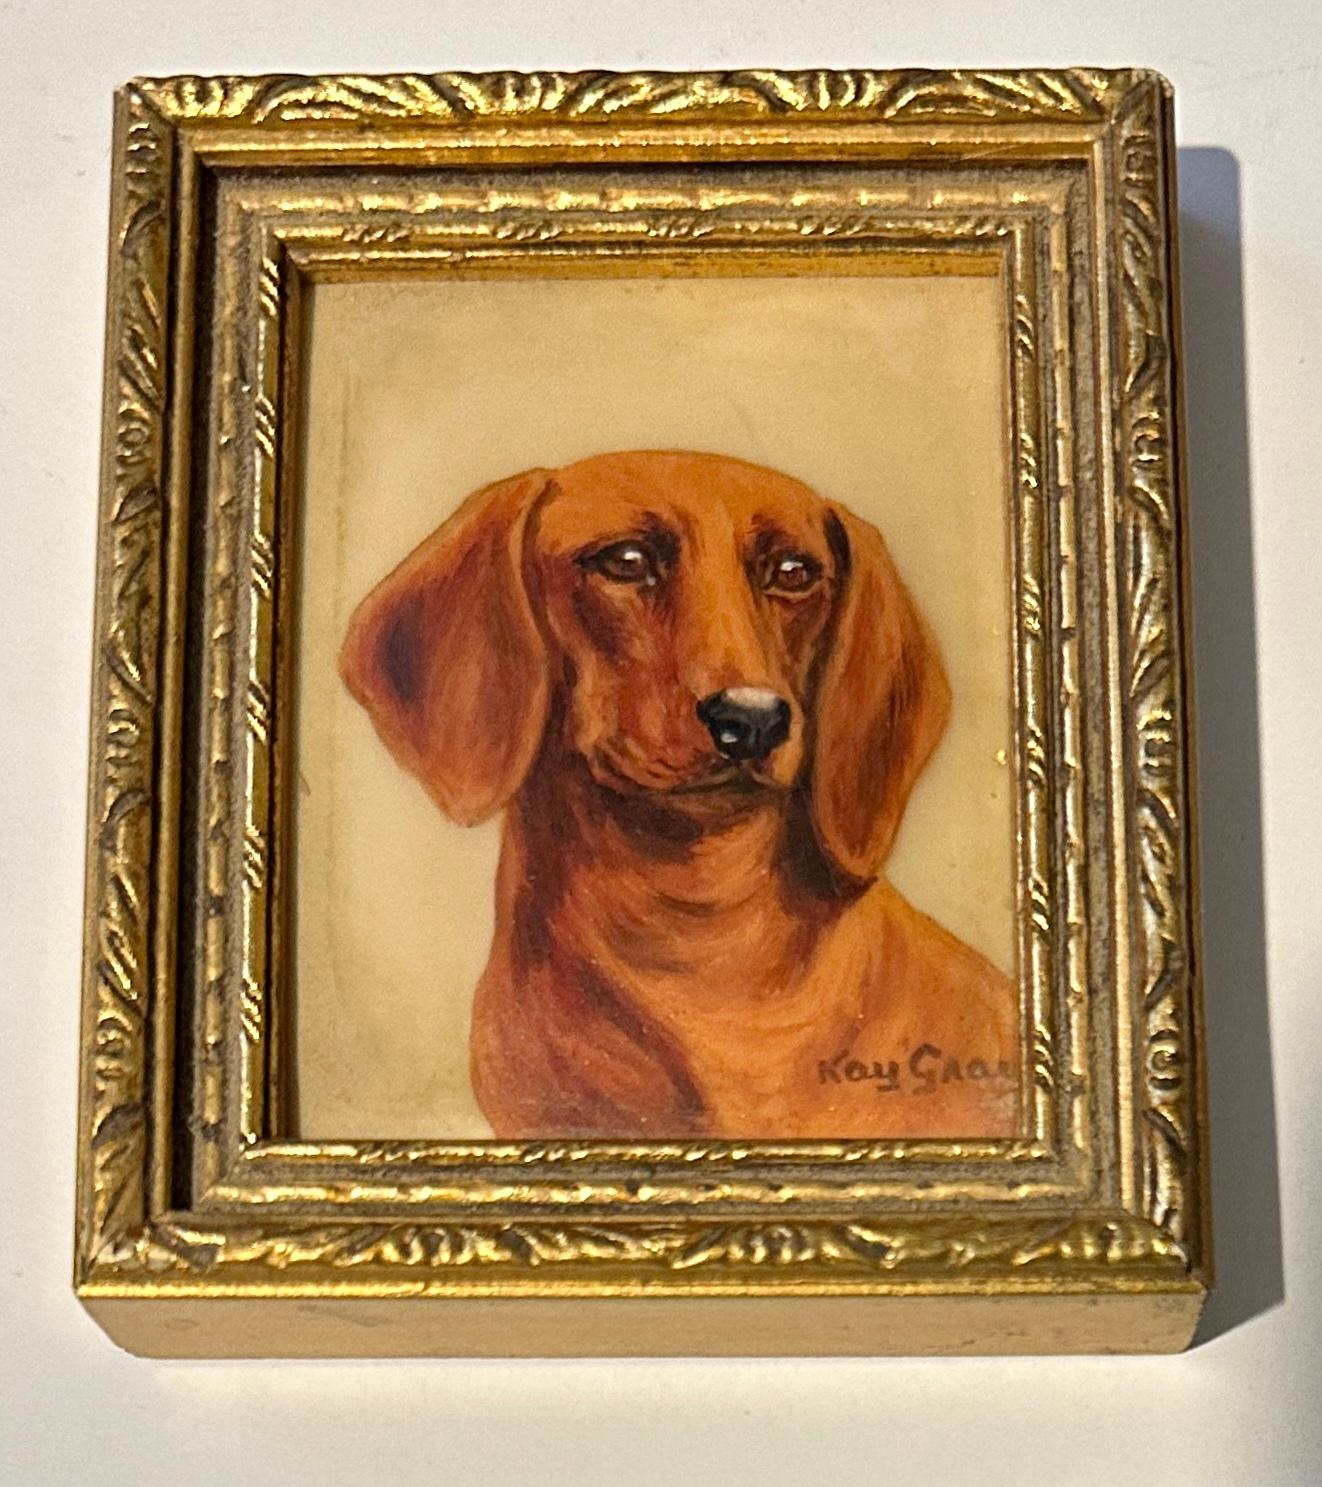 Kate Gray Portrait Painting - English mid century oil painting Portrait of Dachshund puppy or dog